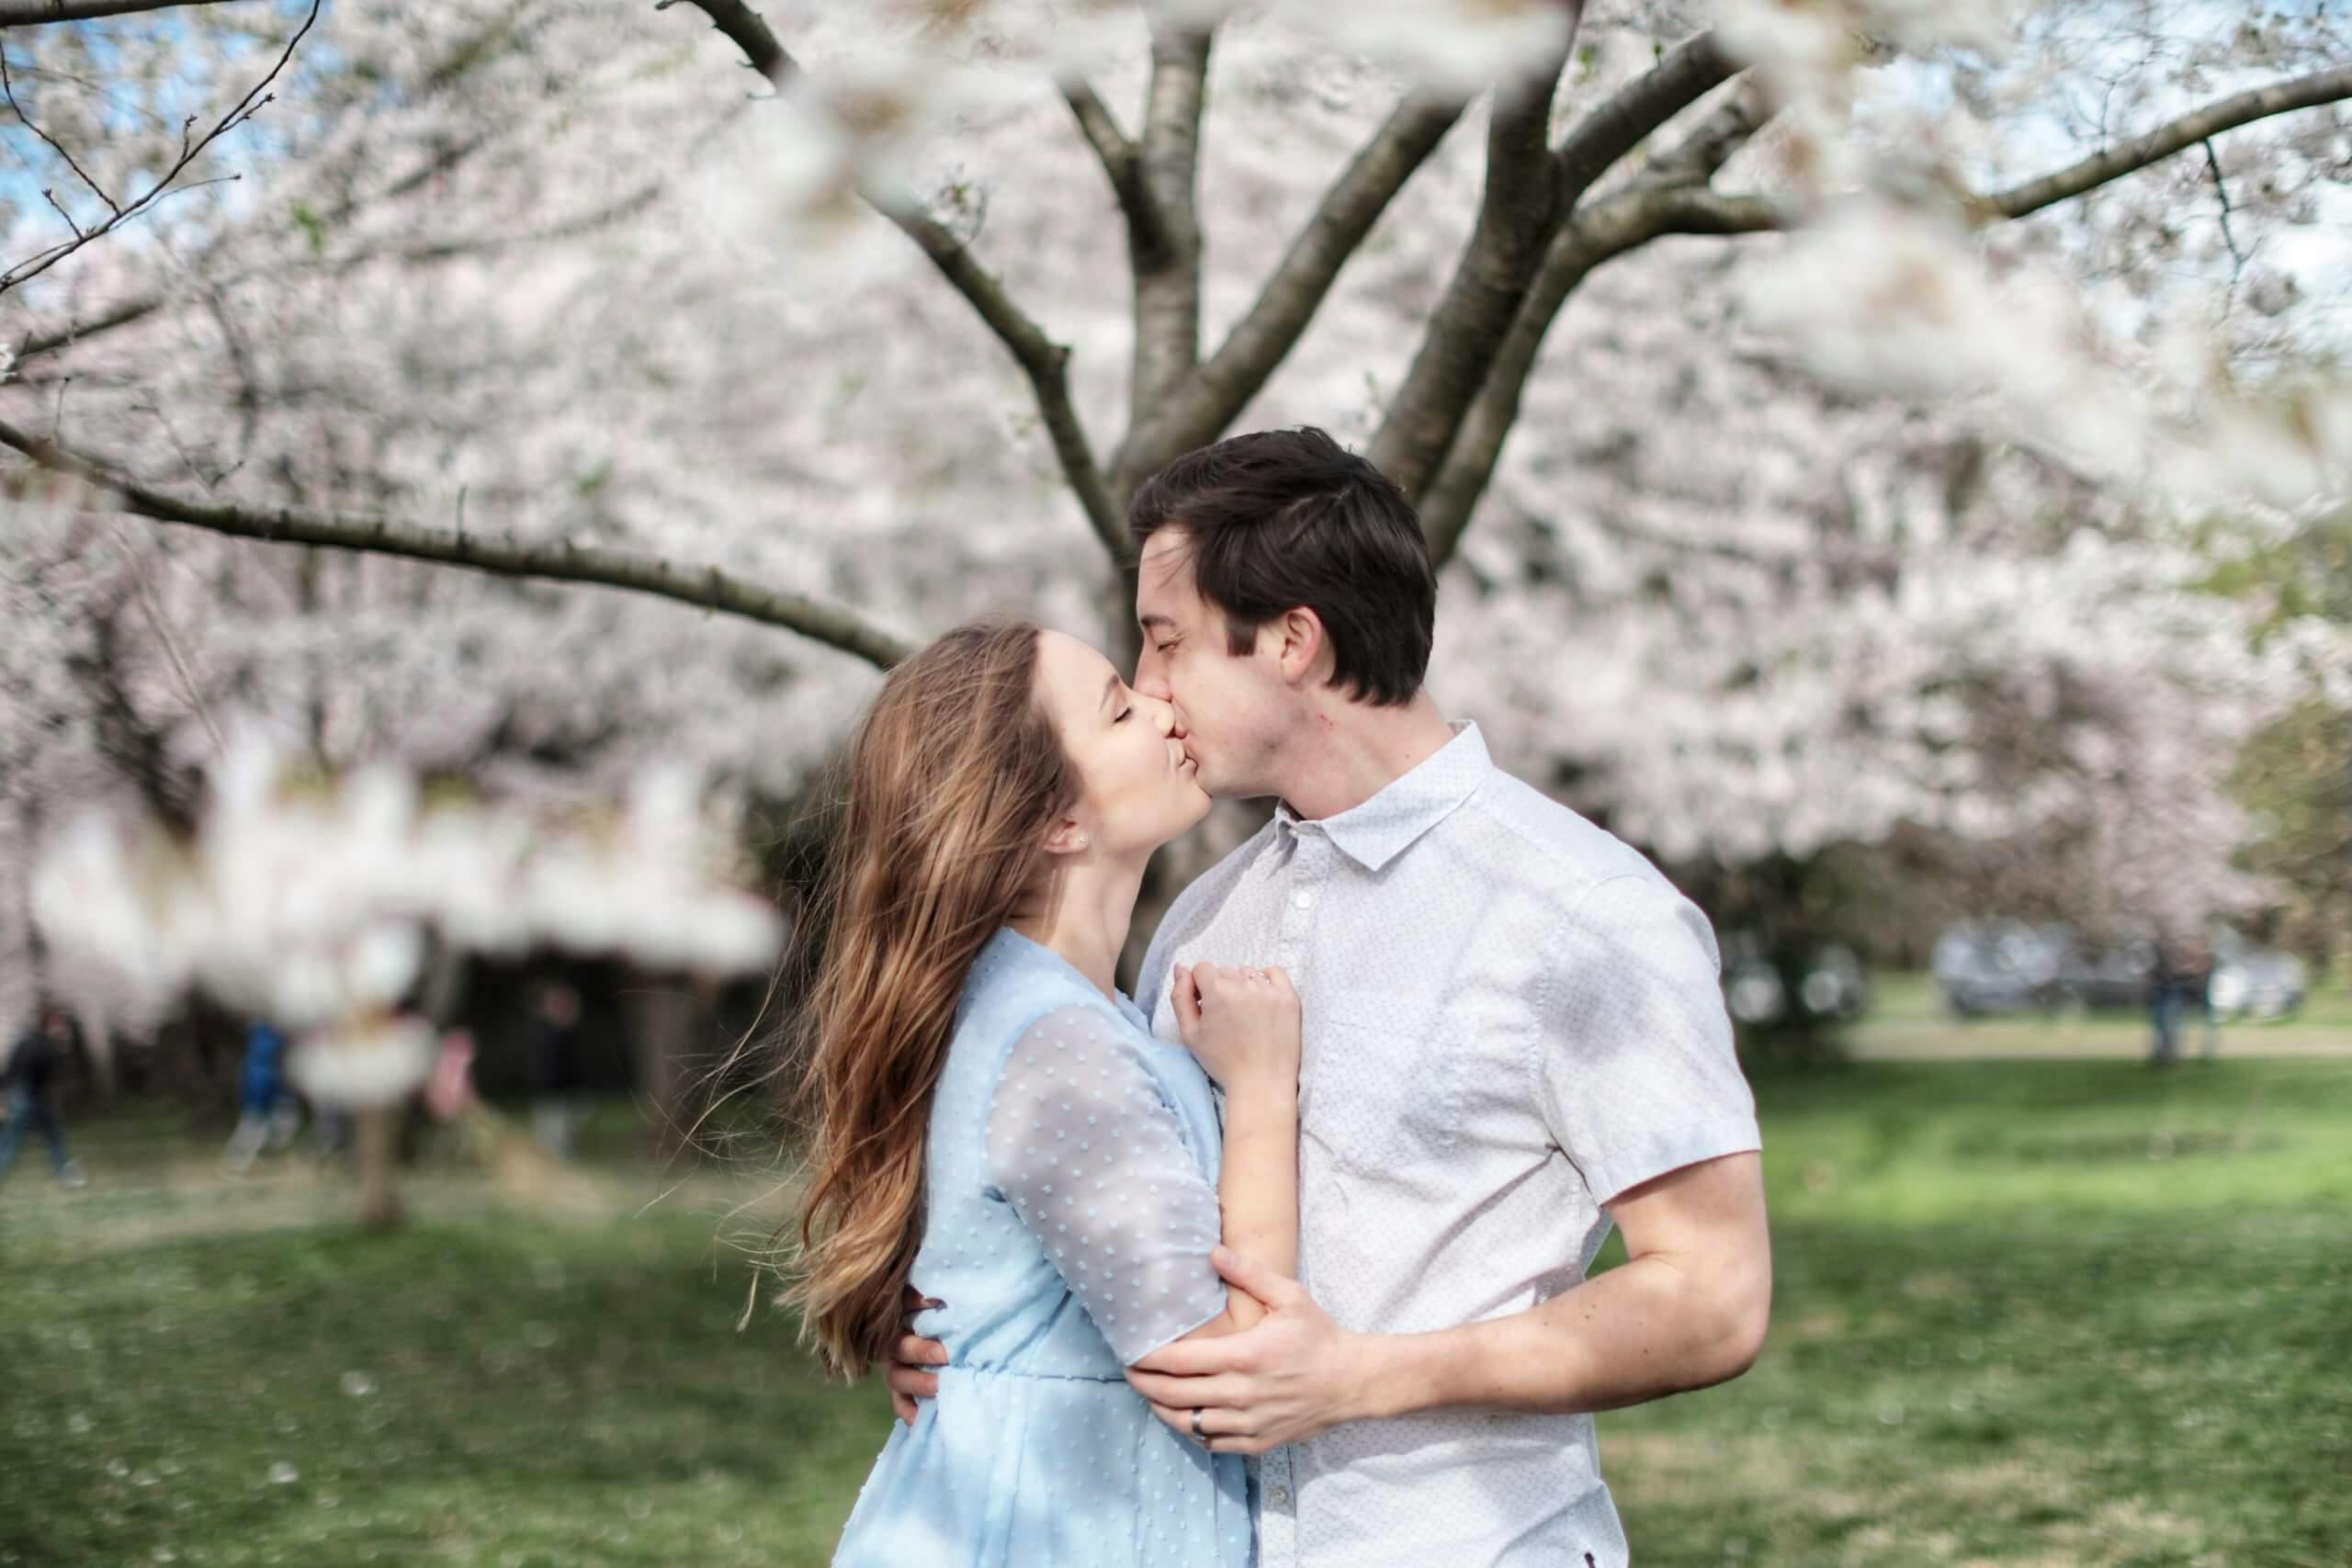 A couple kissing with a backdrop of cherry blossom trees.